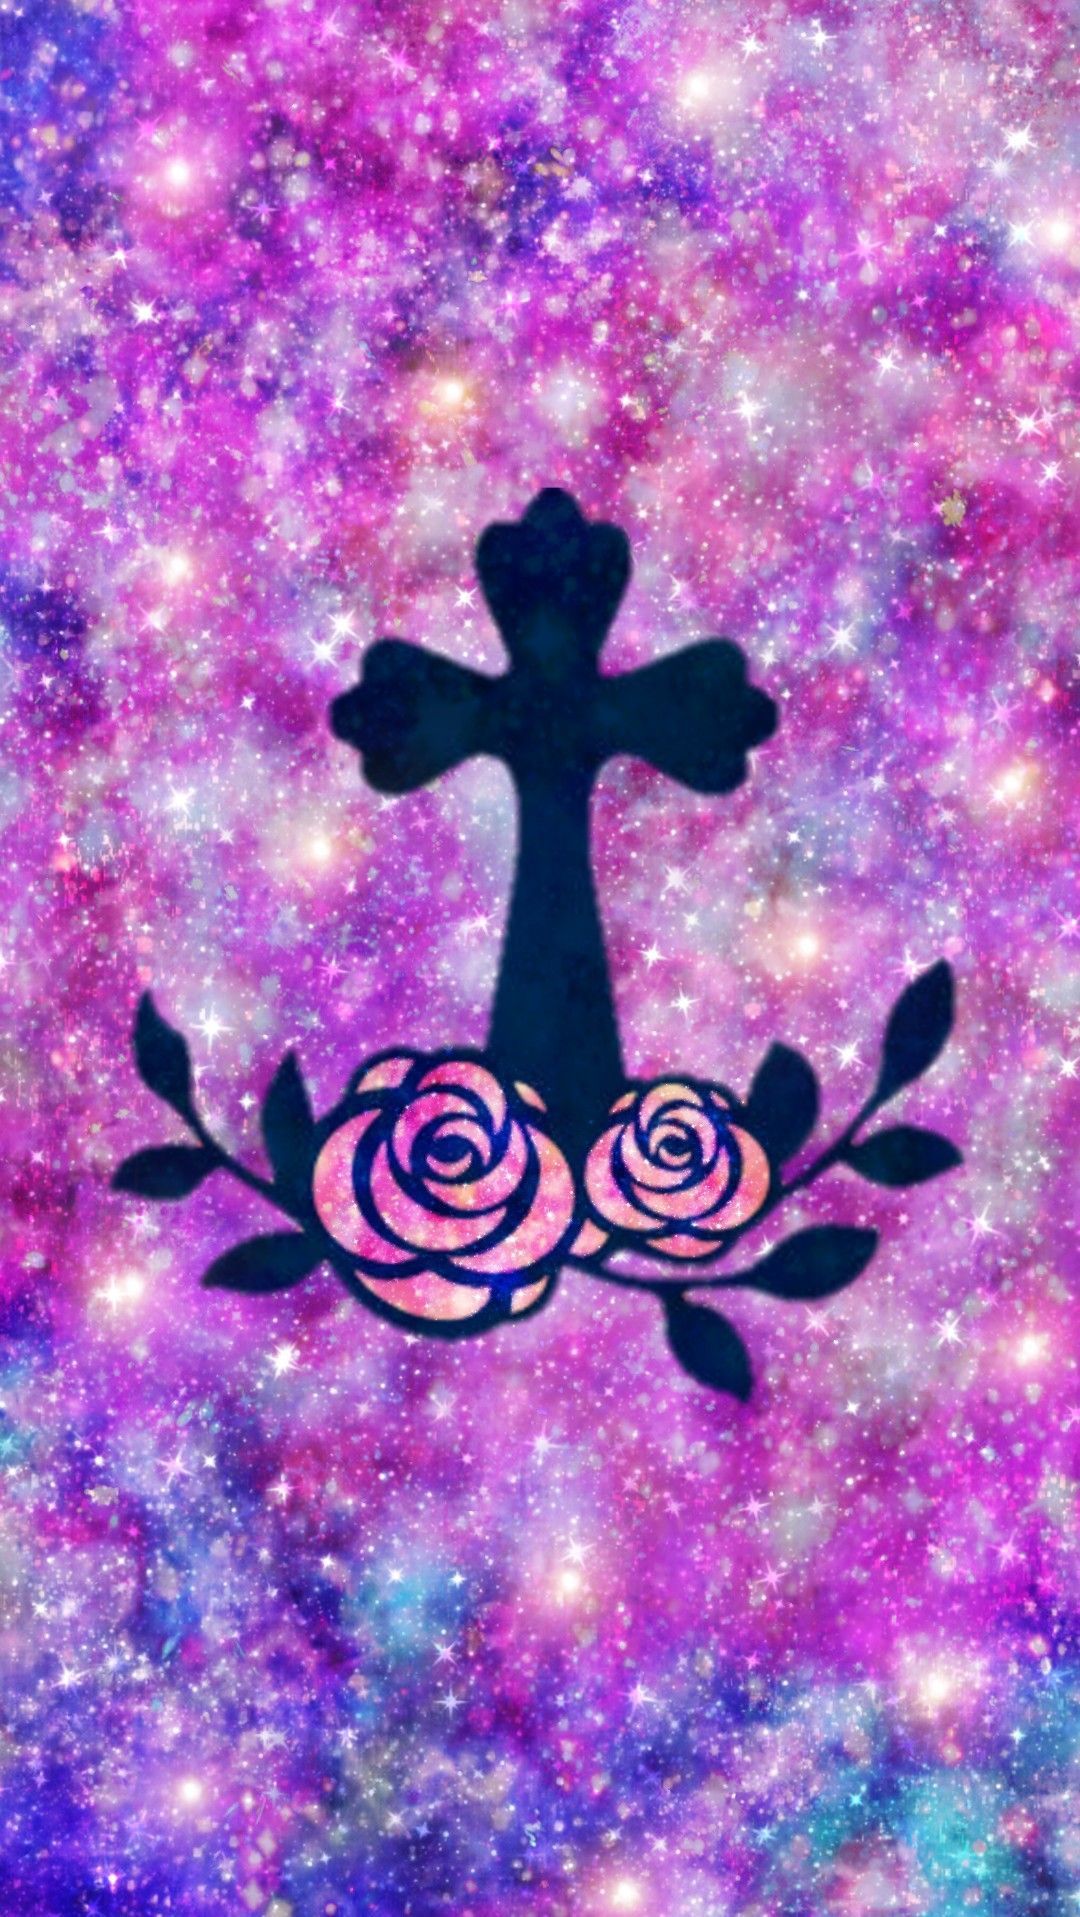 Floral Cross Galaxy, made by me #purple #sparkly #wallpaper #background #sparkles #glitter. Wallpaper iphone neon, Cute wallpaper background, Pretty wallpaper